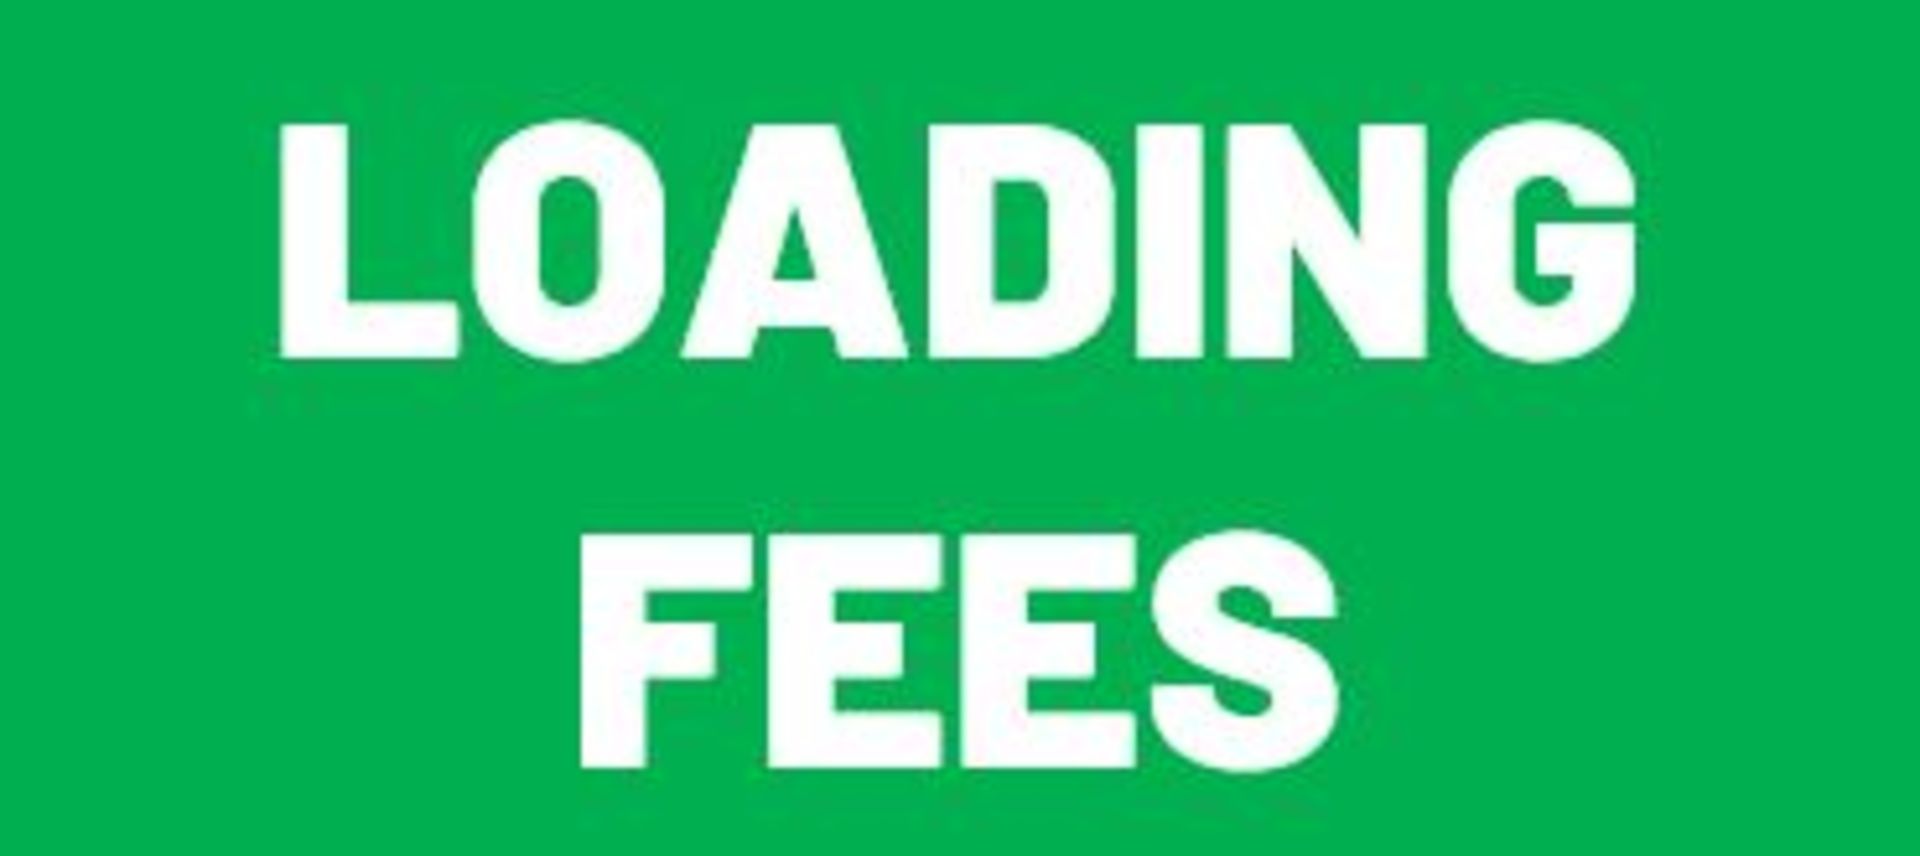 All buyers are required to pay the loading fees as listed in the lot description